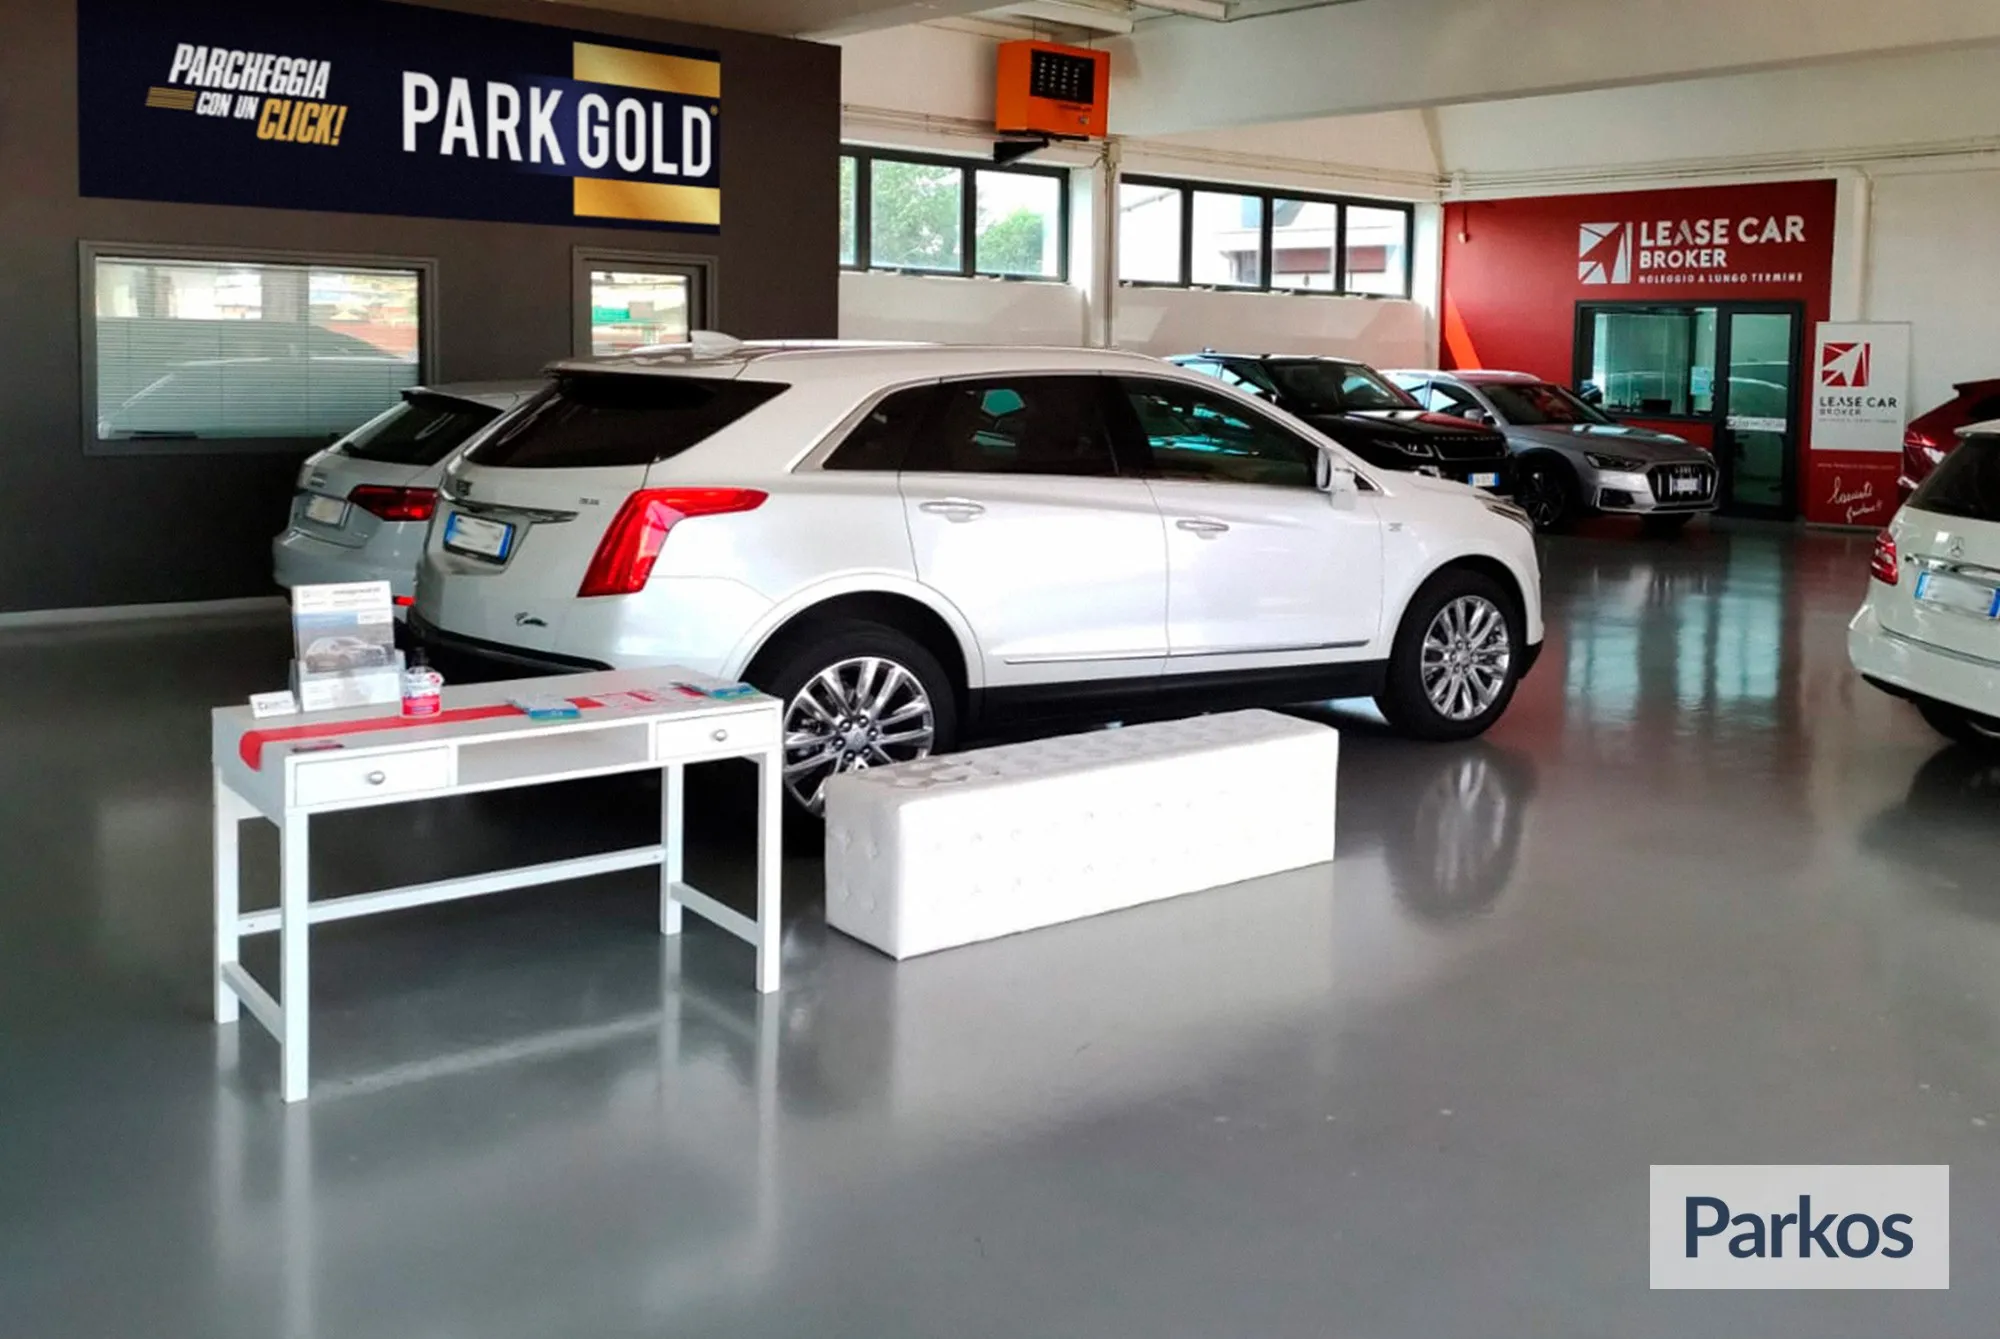 Park Gold Treviso (Paga online) - Treviso Airport Parking - picture 1